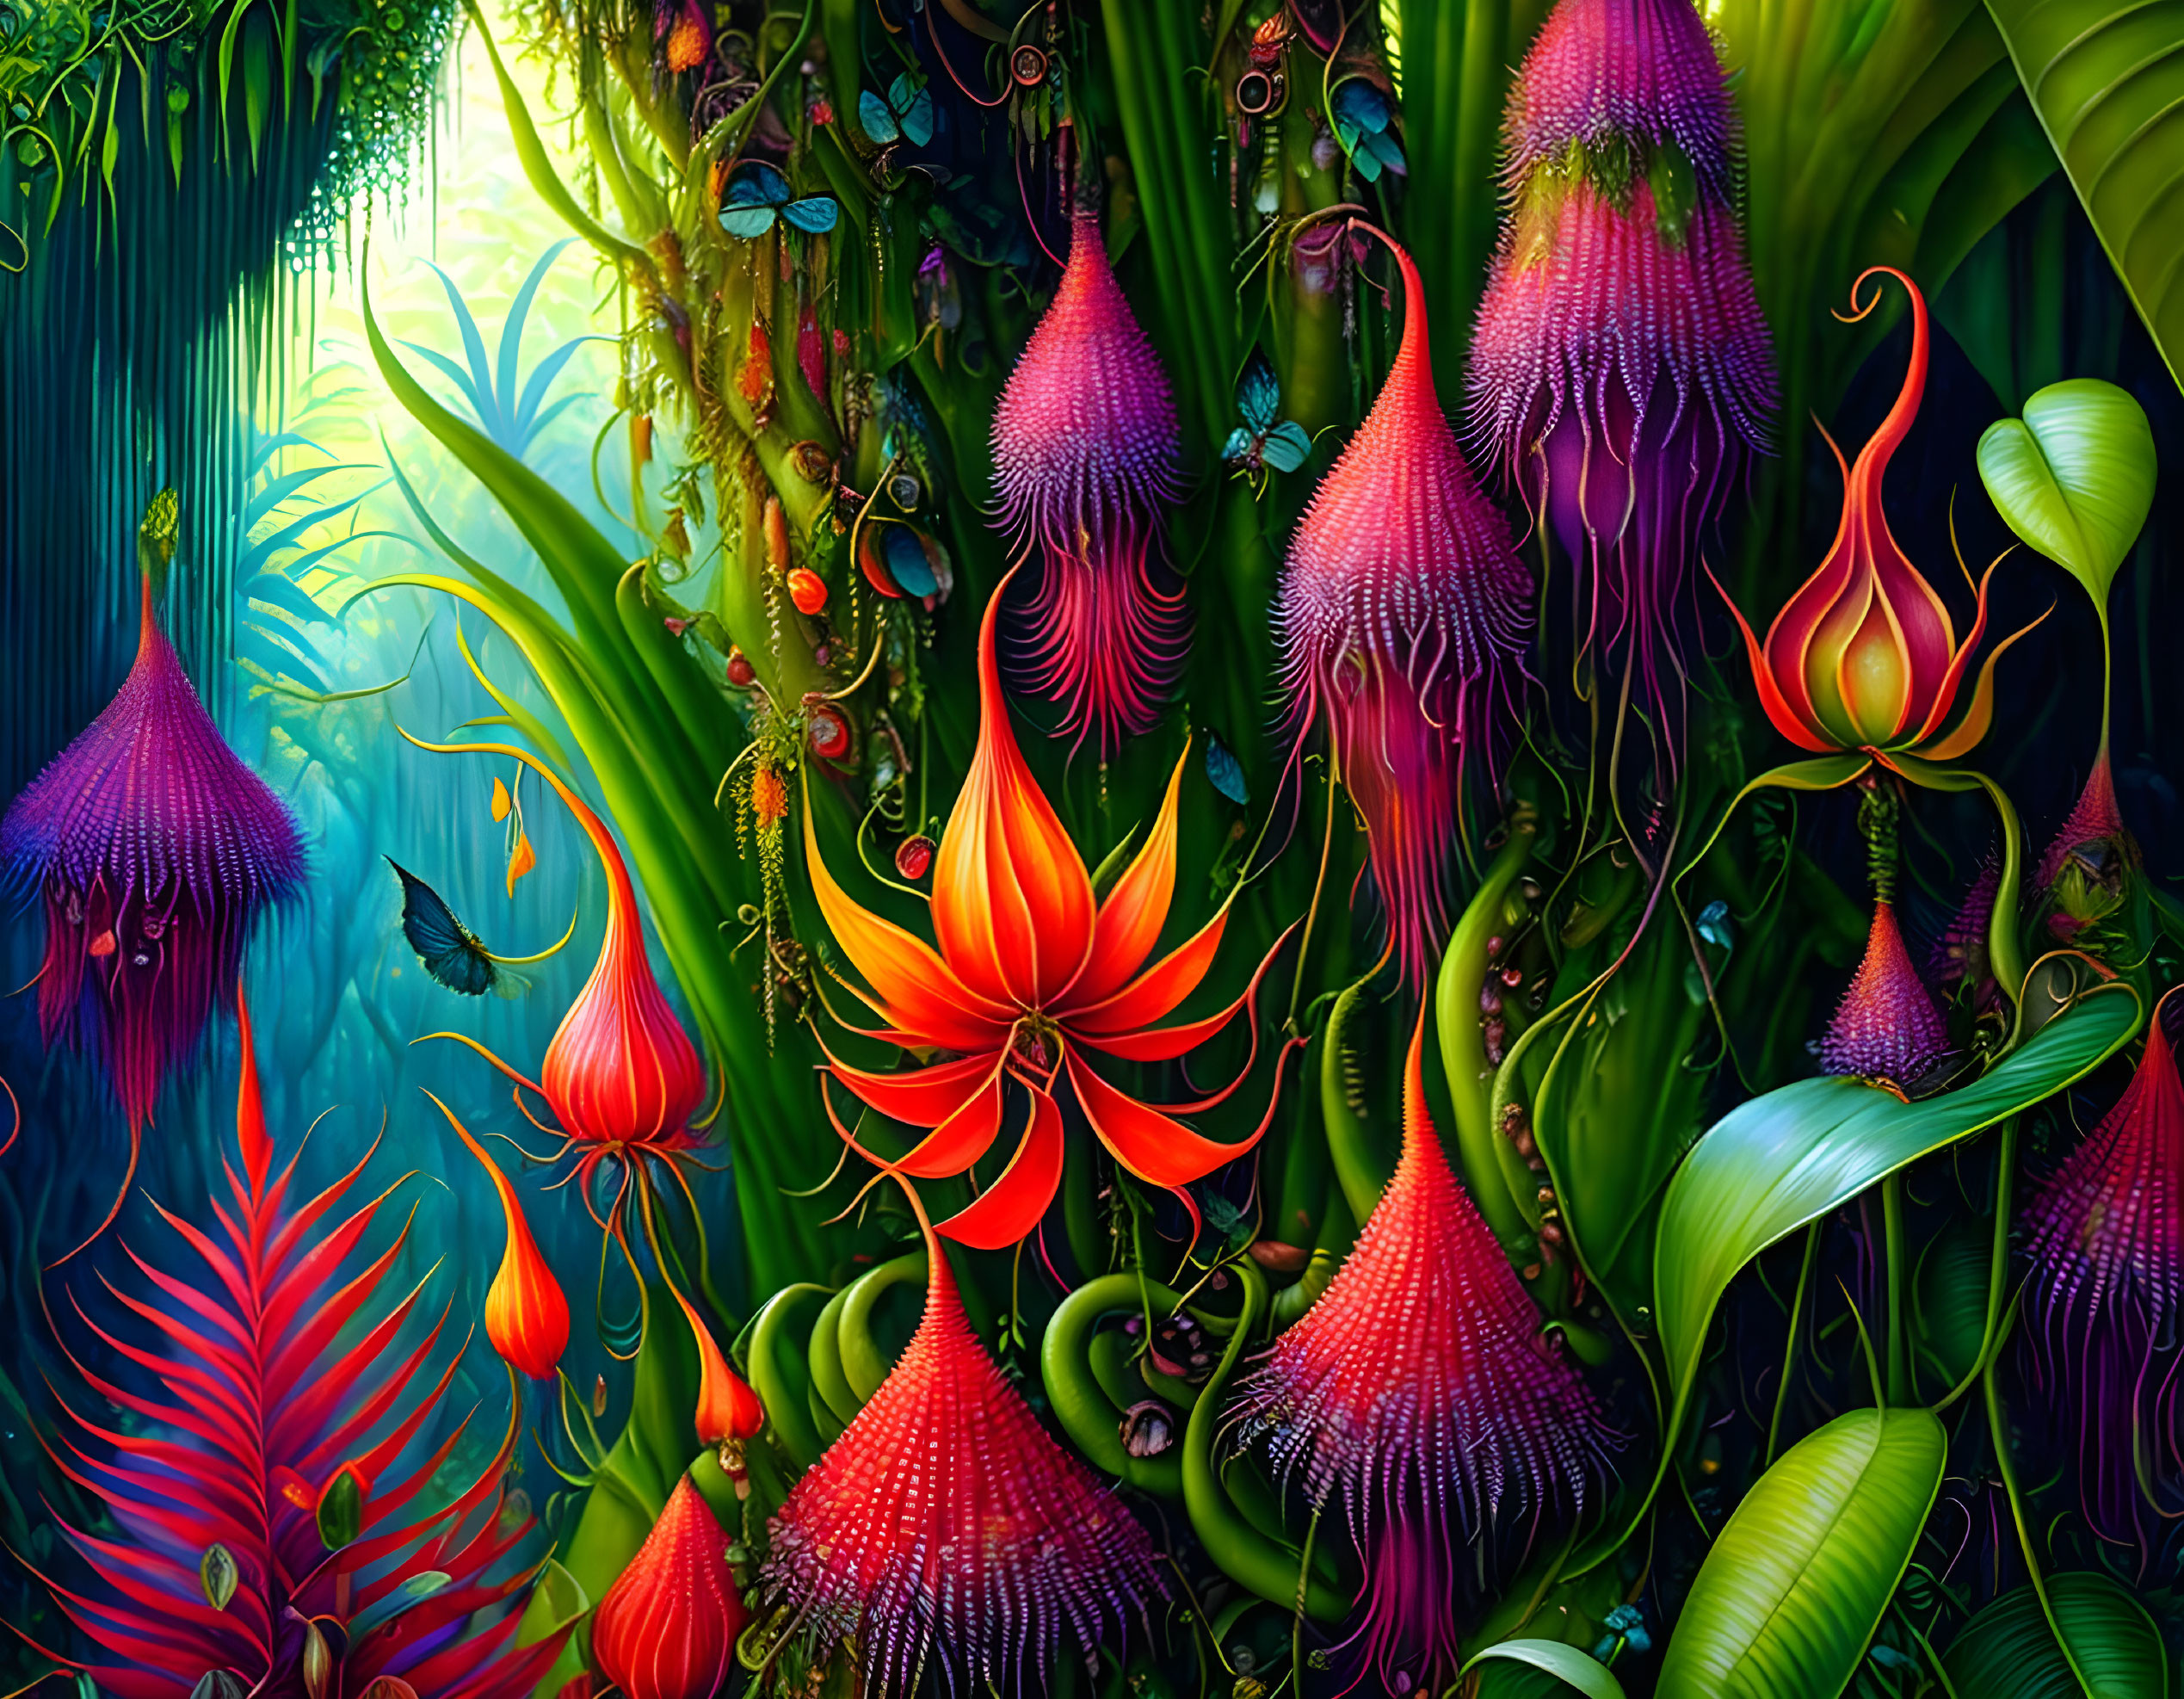 Jungle plants in the swamp on an alien planet